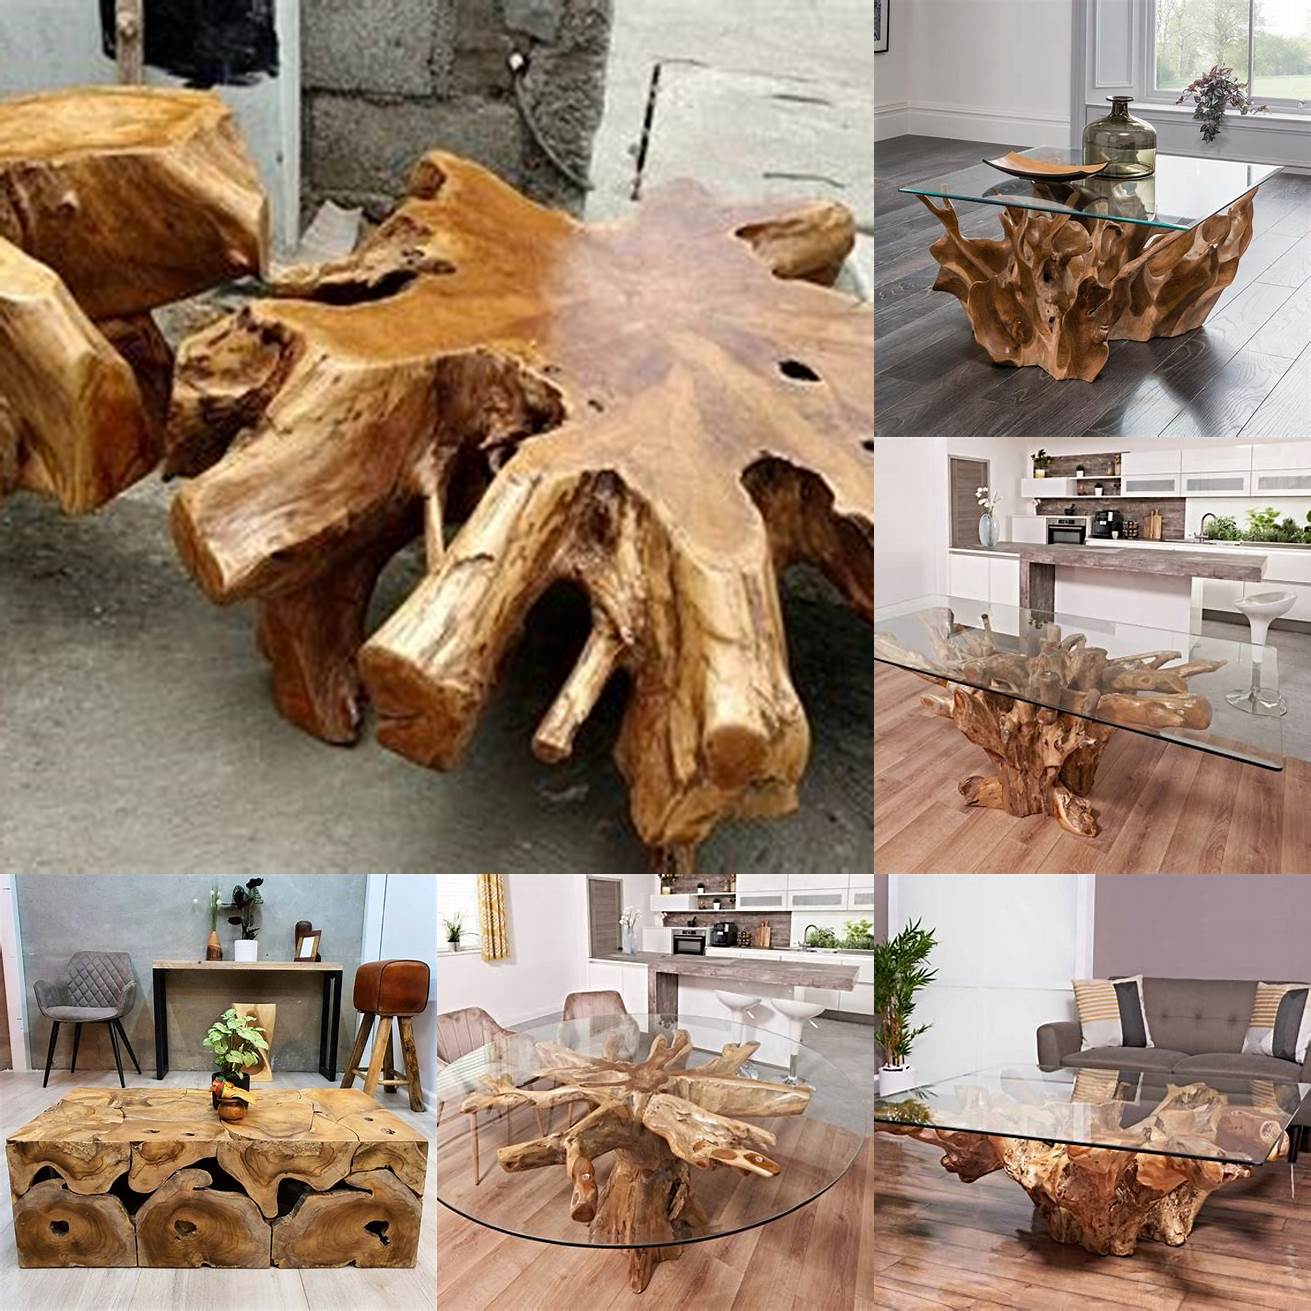 The Manufacturing Process of a Teak Root Table